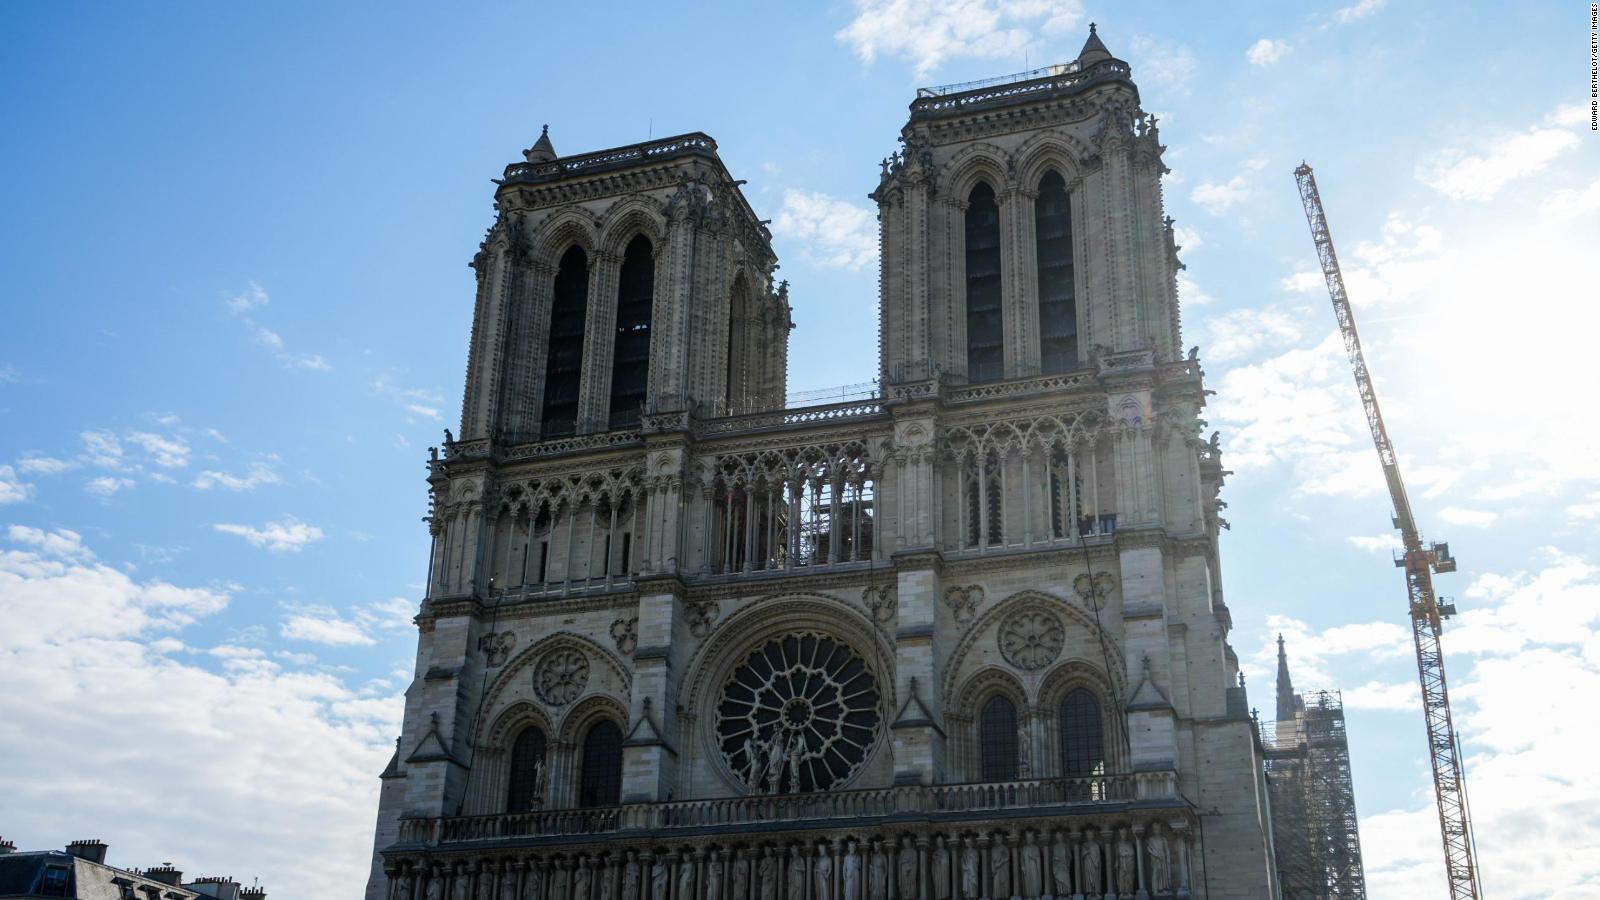 Sickness Refreshing raid Notre Dame cathedral in Paris will reopen in 2024, five years after  disastrous fire - CNN Style